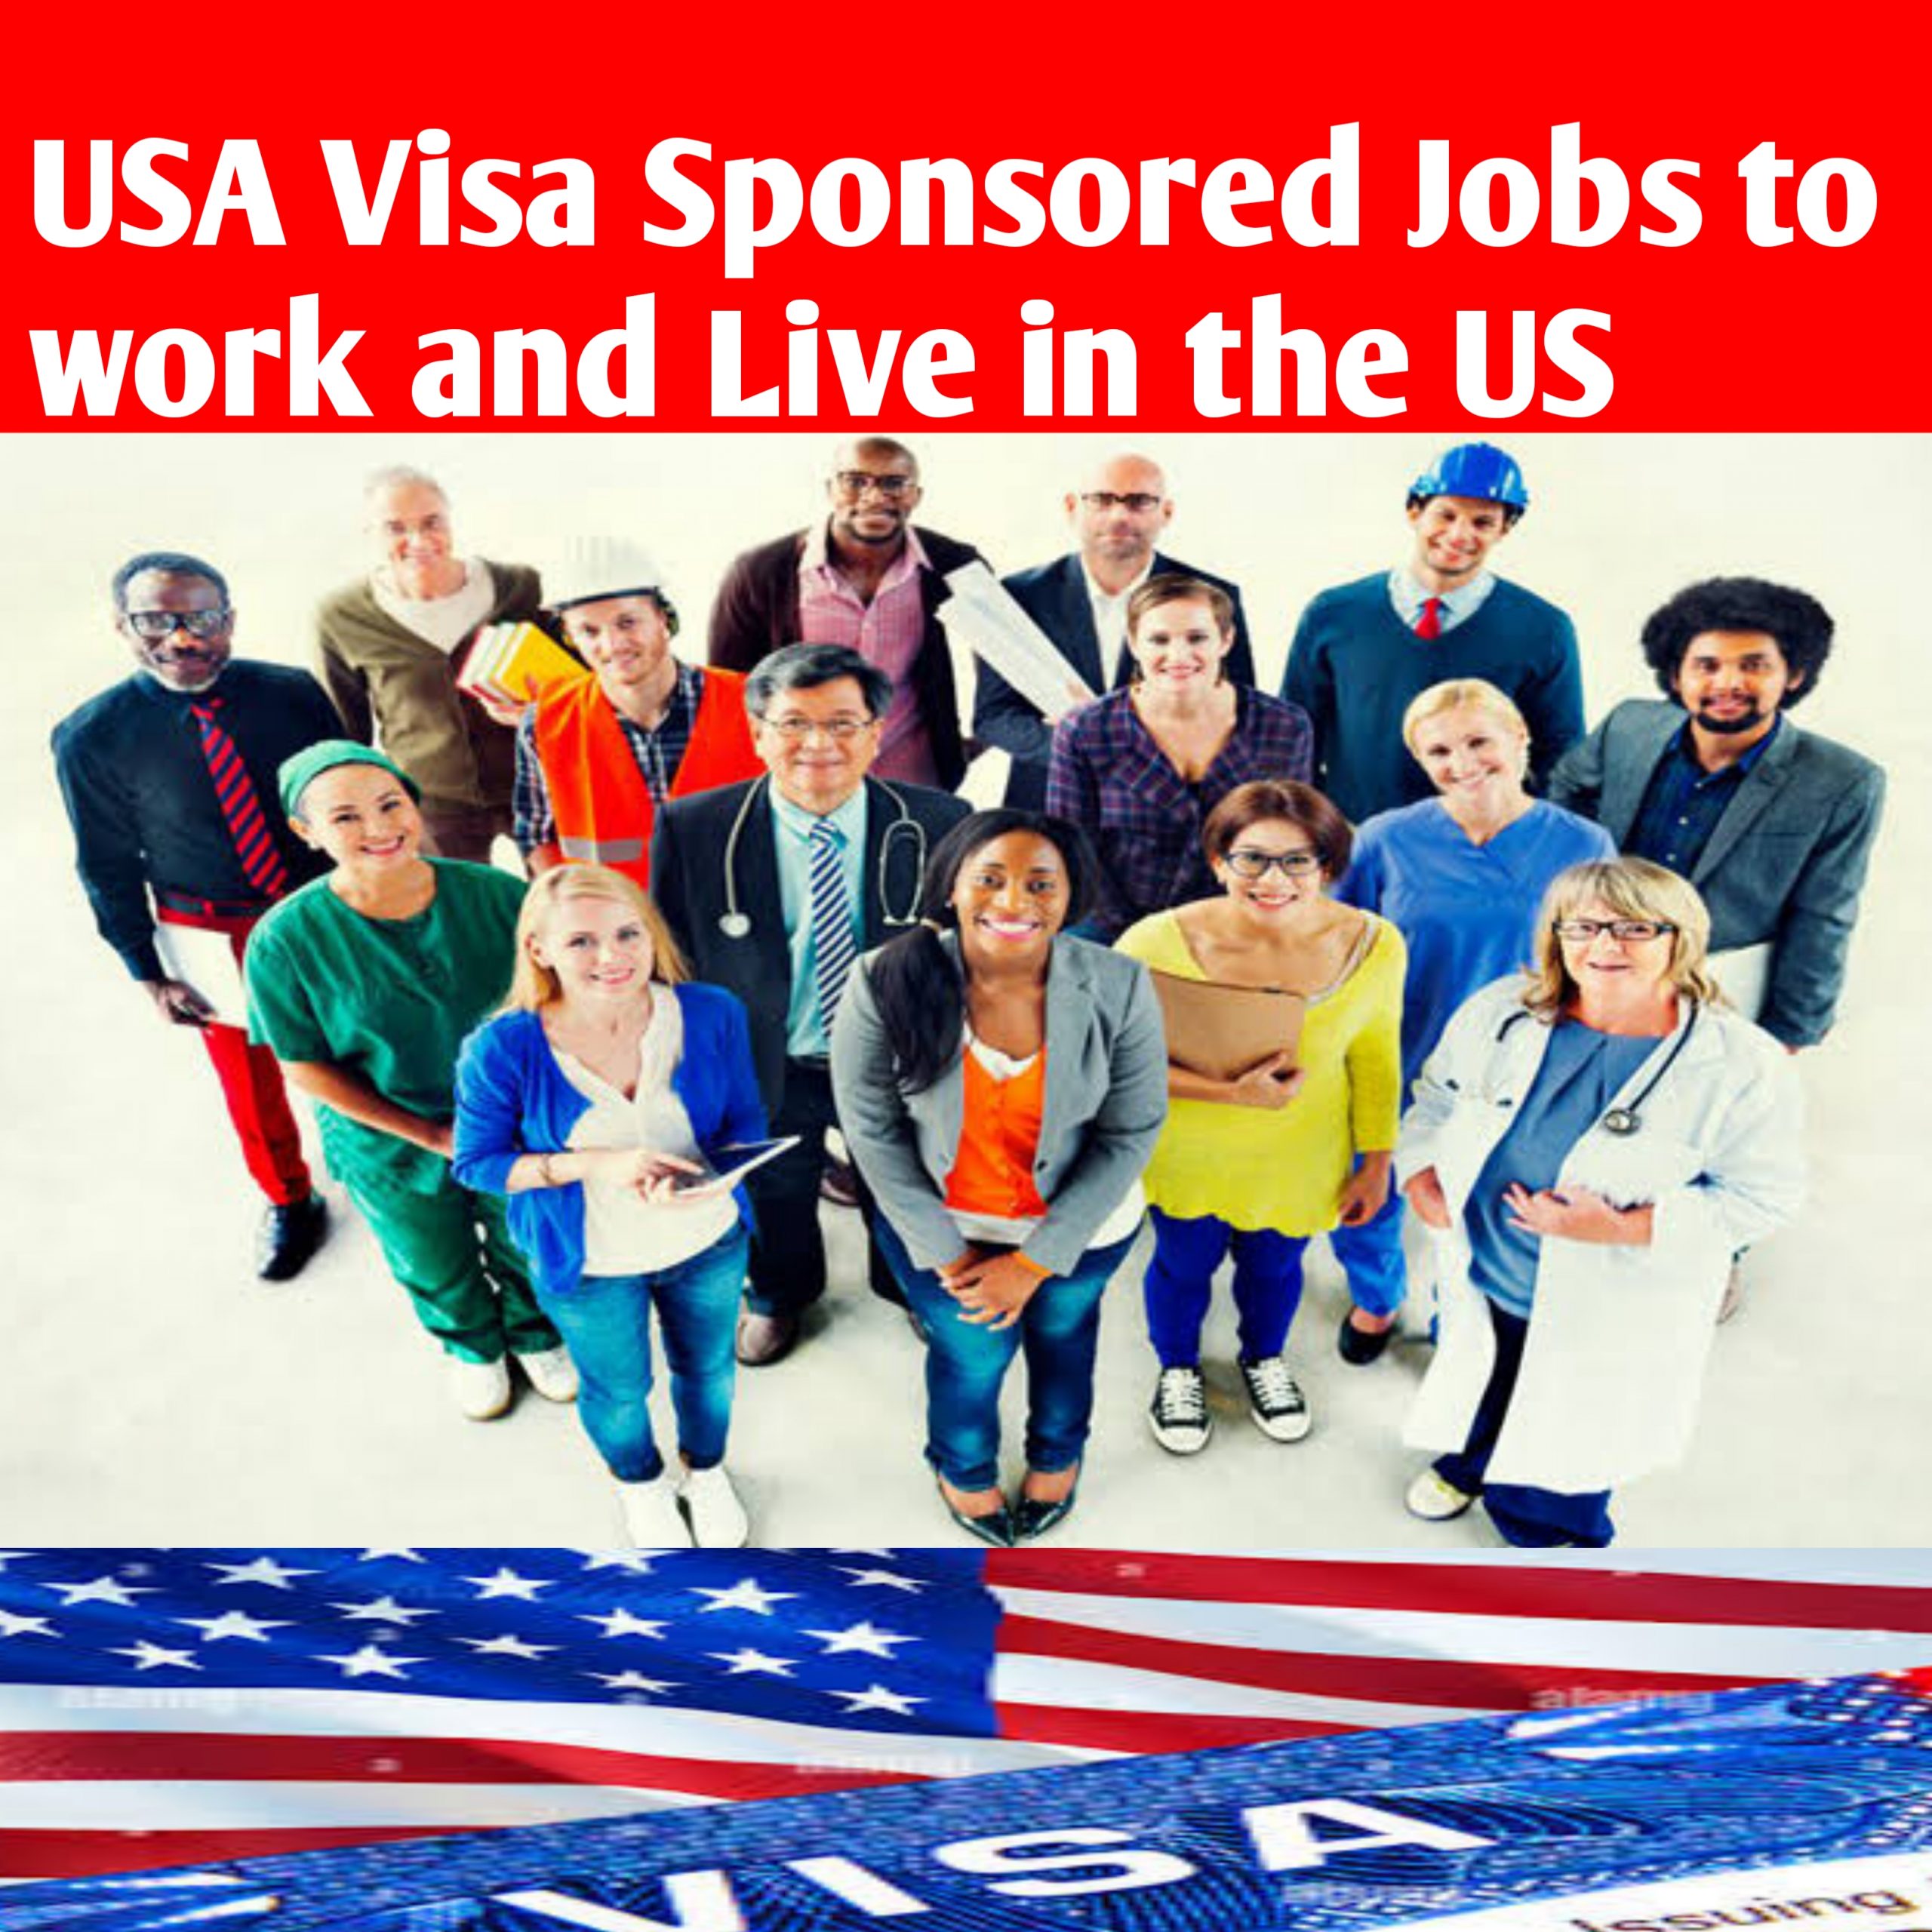 20221015 214135 scaled - USA Visa Sponsored Jobs to work and Live in the US